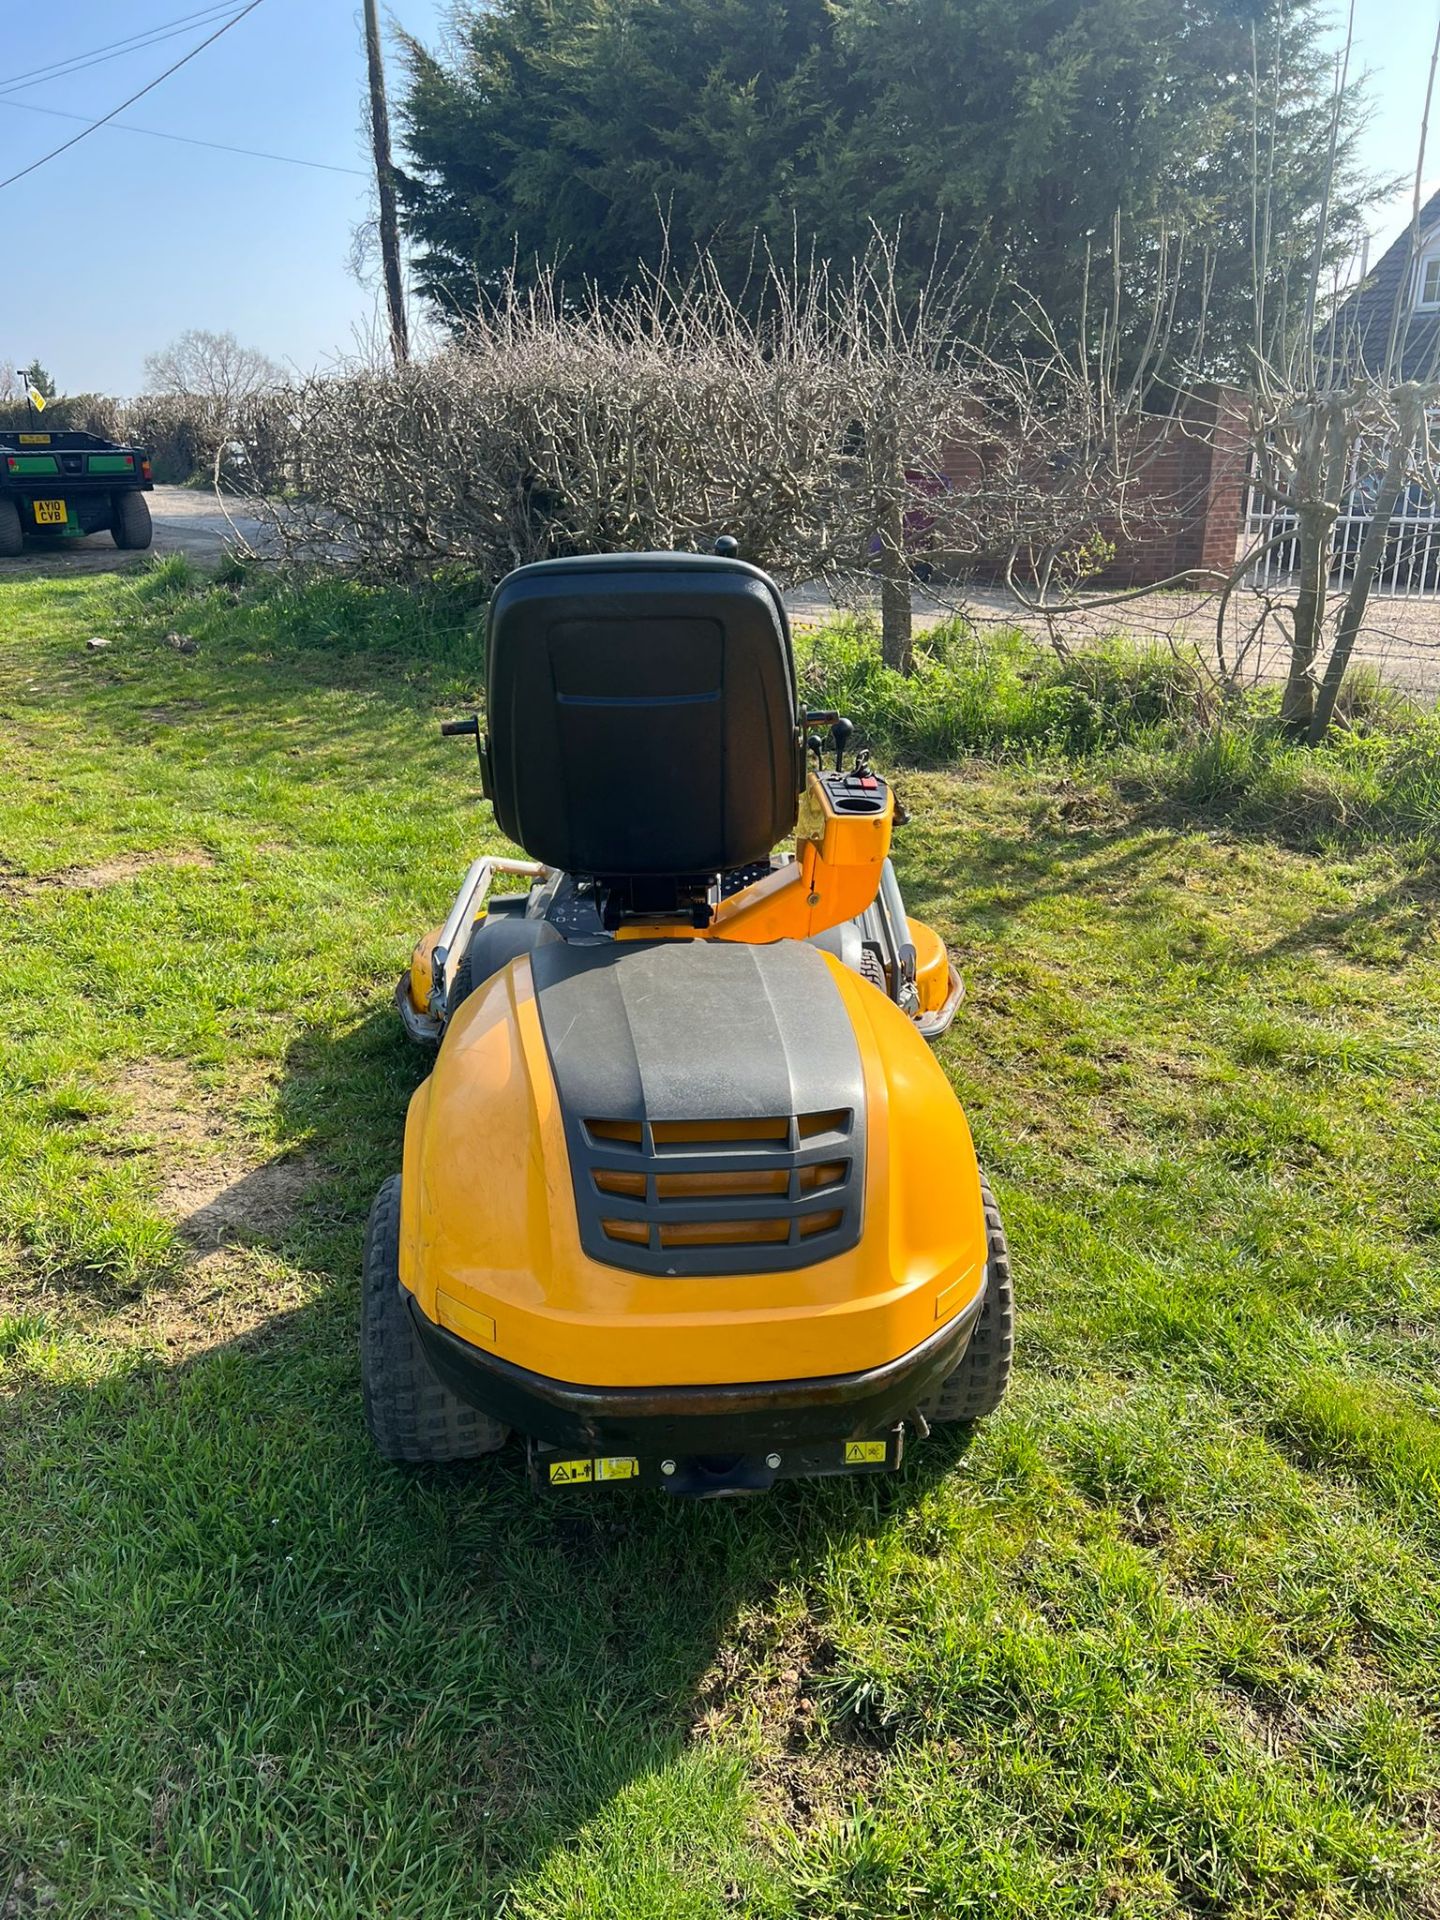 STIGA PARK 540 DPX RIDE ON LAWN MOWER DIESEL ENGINE, Runs drives and cuts, Year 2016 *PLUS VAT* - Image 4 of 6